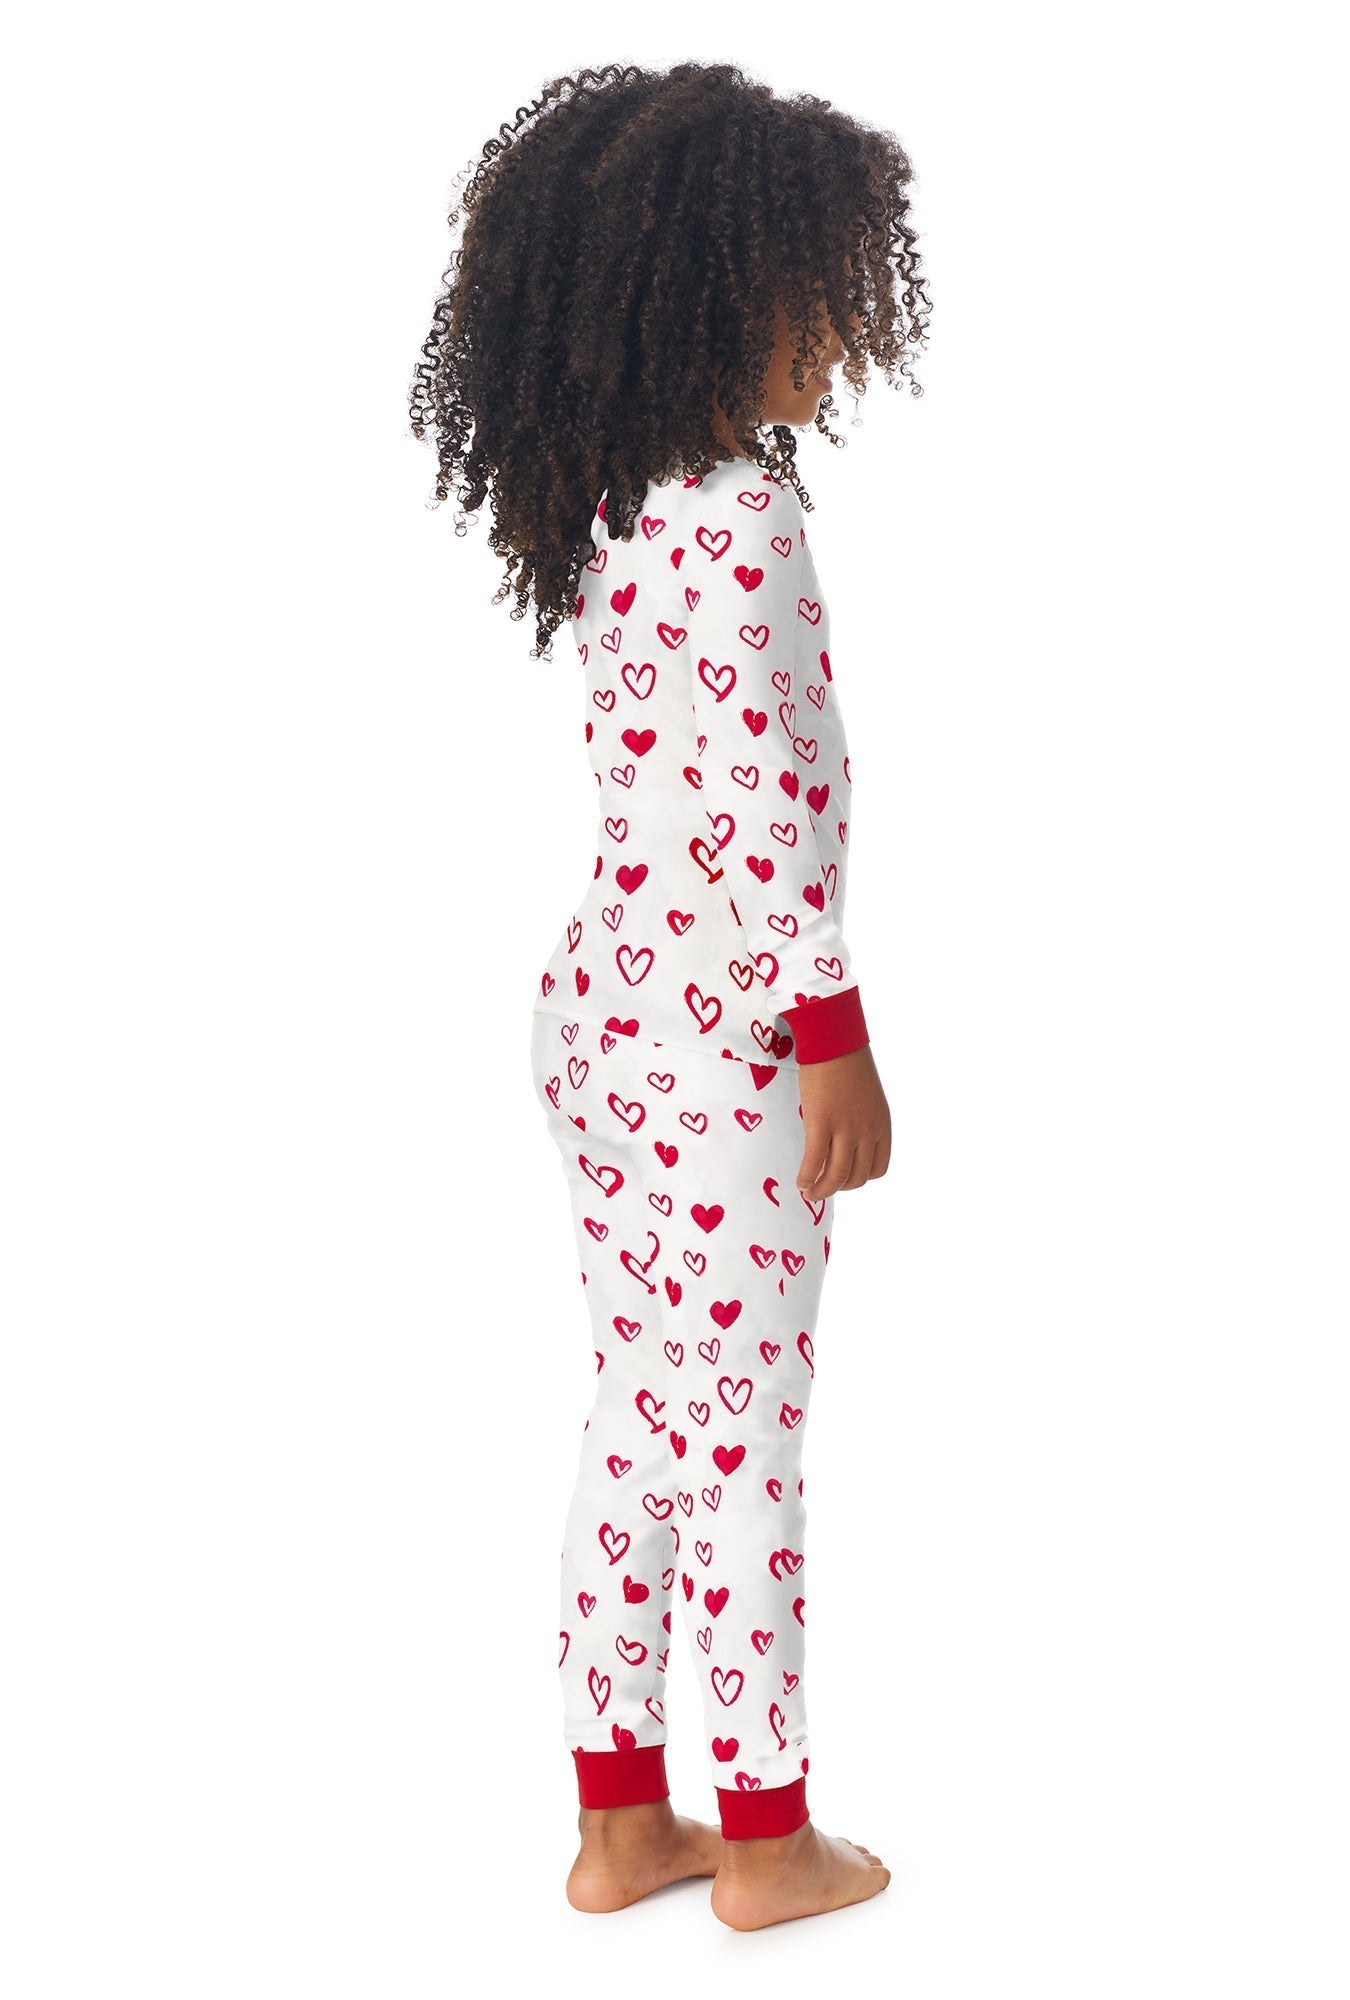 Love is in the Air Long Sleeve Stretch Jersey Kids PJ Set